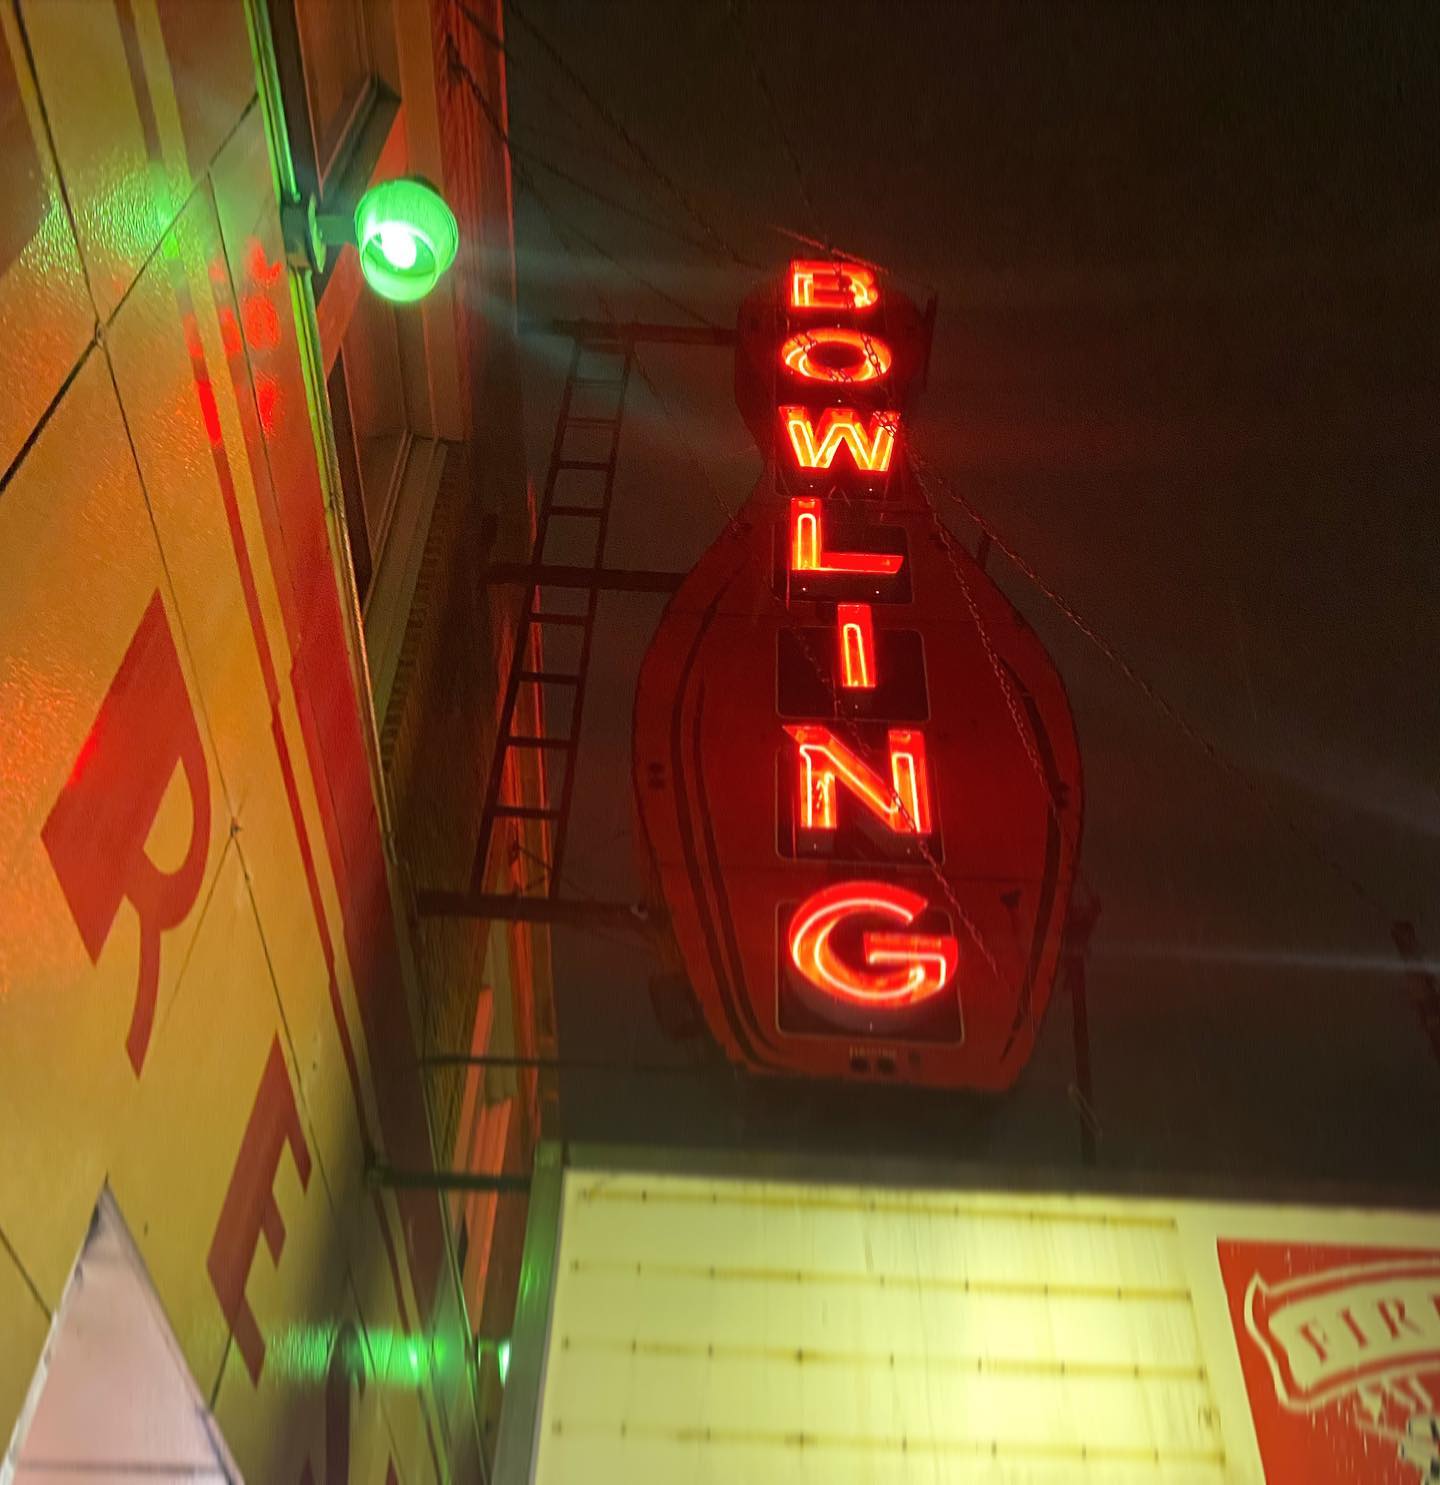 Anyone got any fond memories of the Fireside? We sure do! #bowlingalley #logansquare #1940s #history